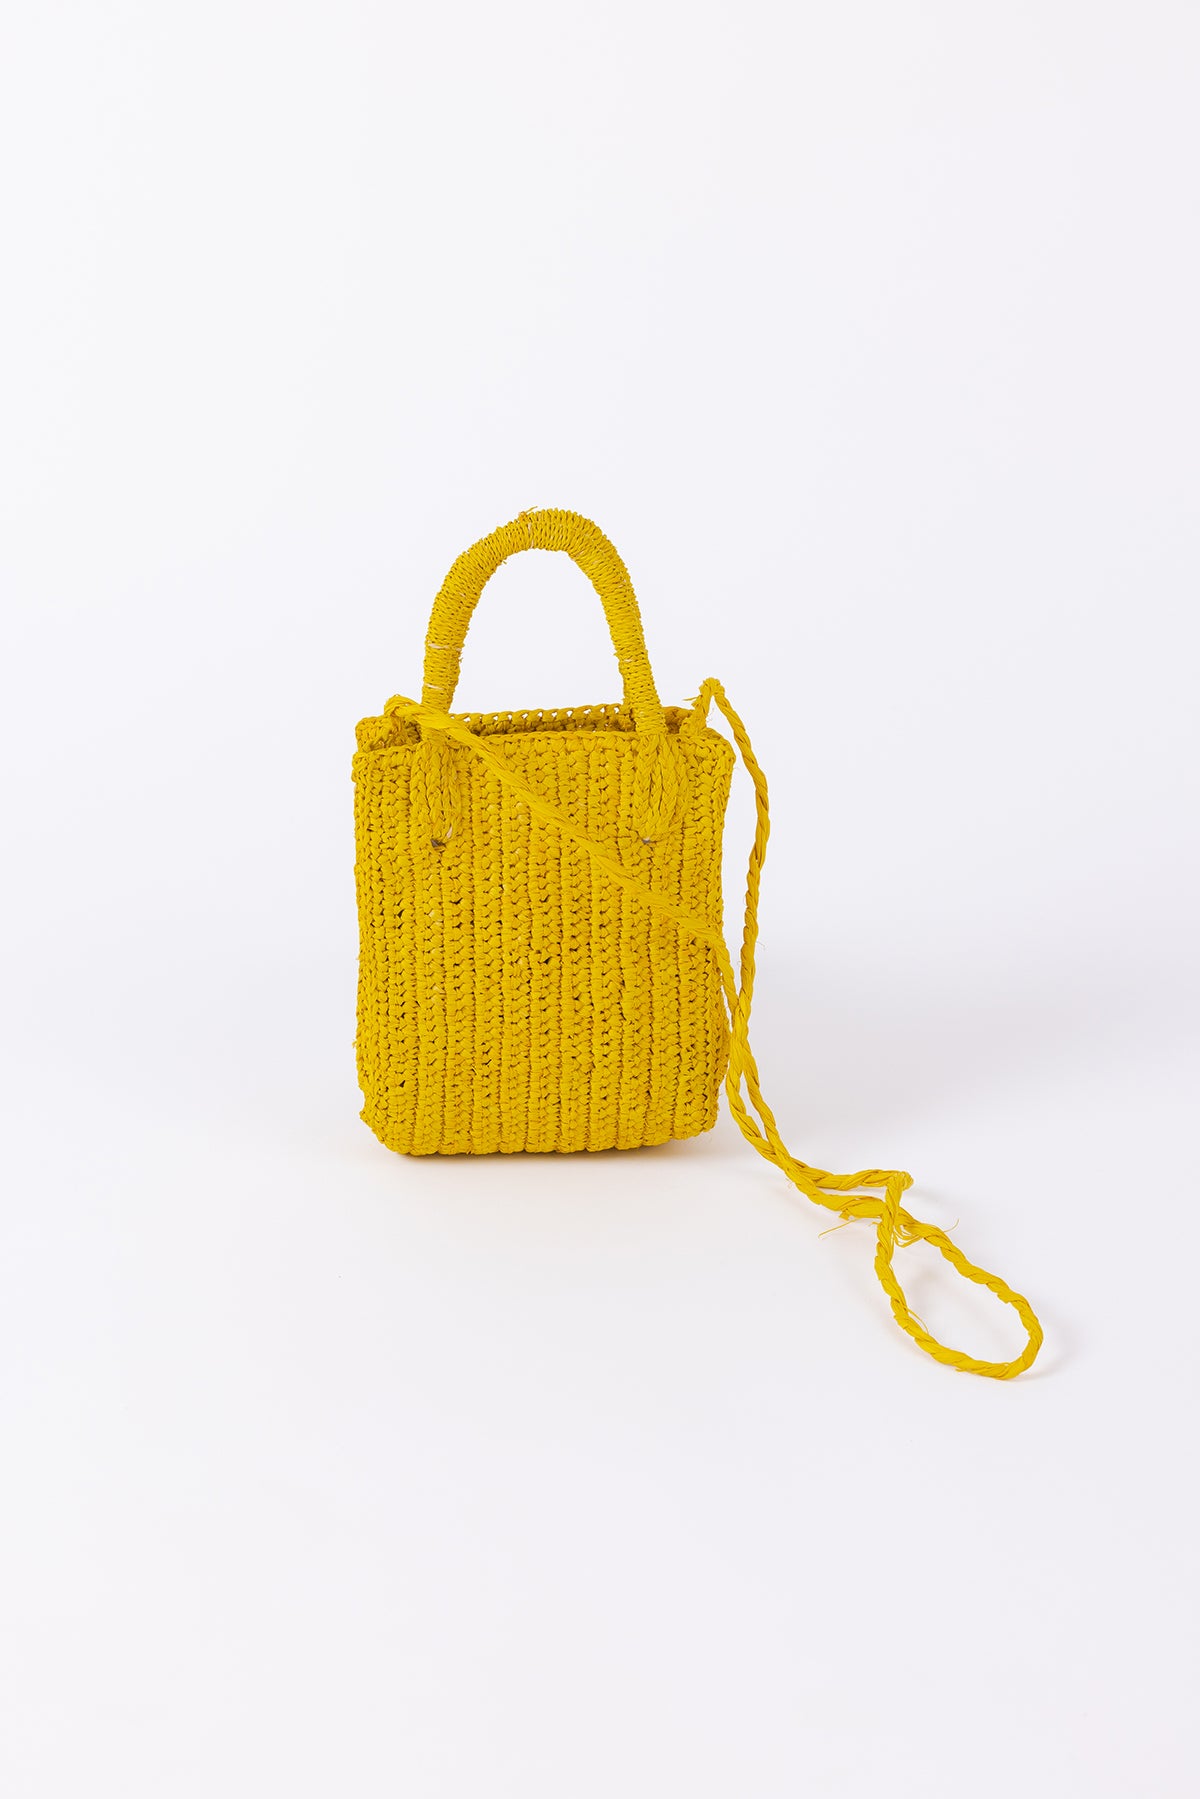 Bright yellow knitted MIMI RAFFIA CROSSBODY bag with a strap on a white background by Velvet by Graham & Spencer.-26047808078017